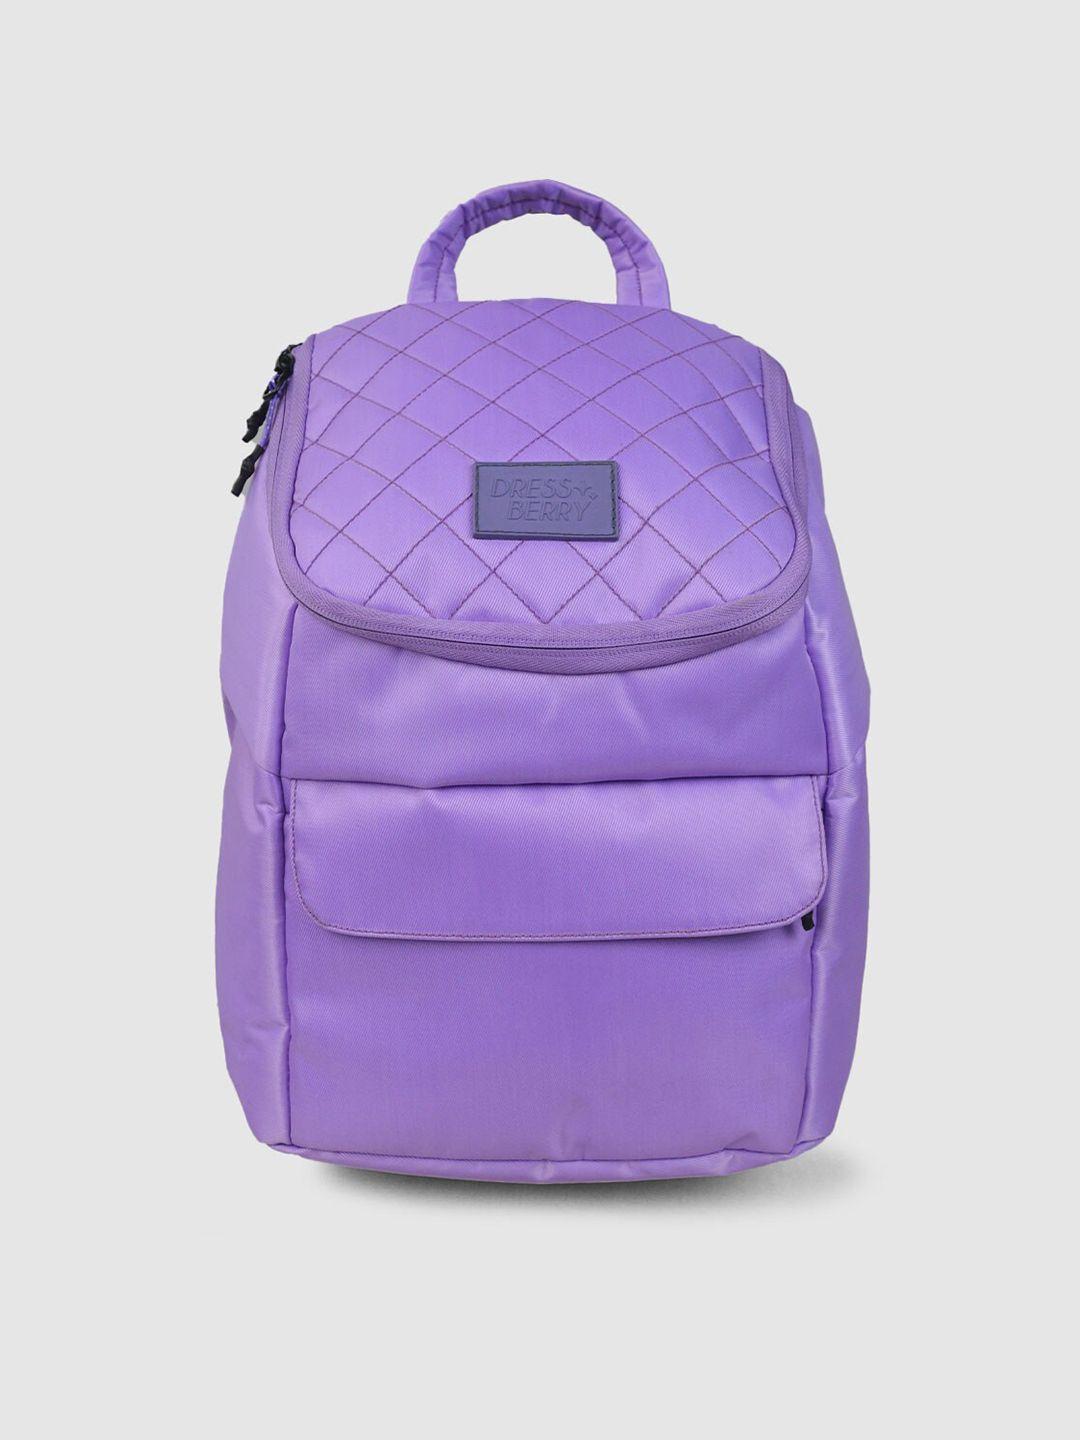 dressberry women purple quilted backpack